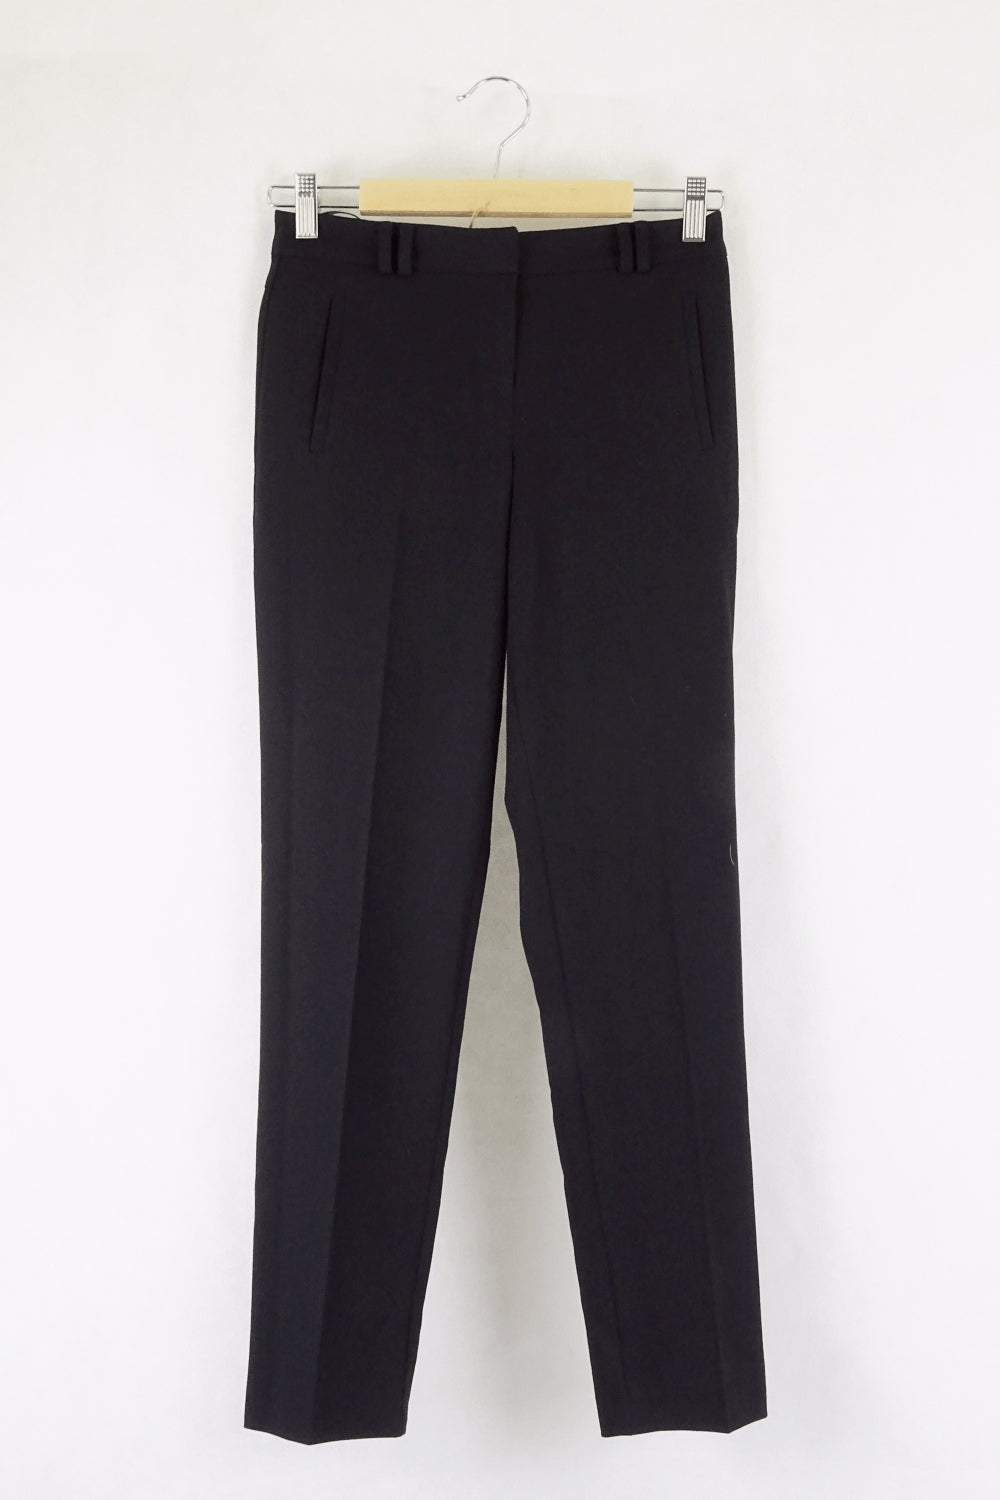 HUGO - Regular-fit trousers with front pleats